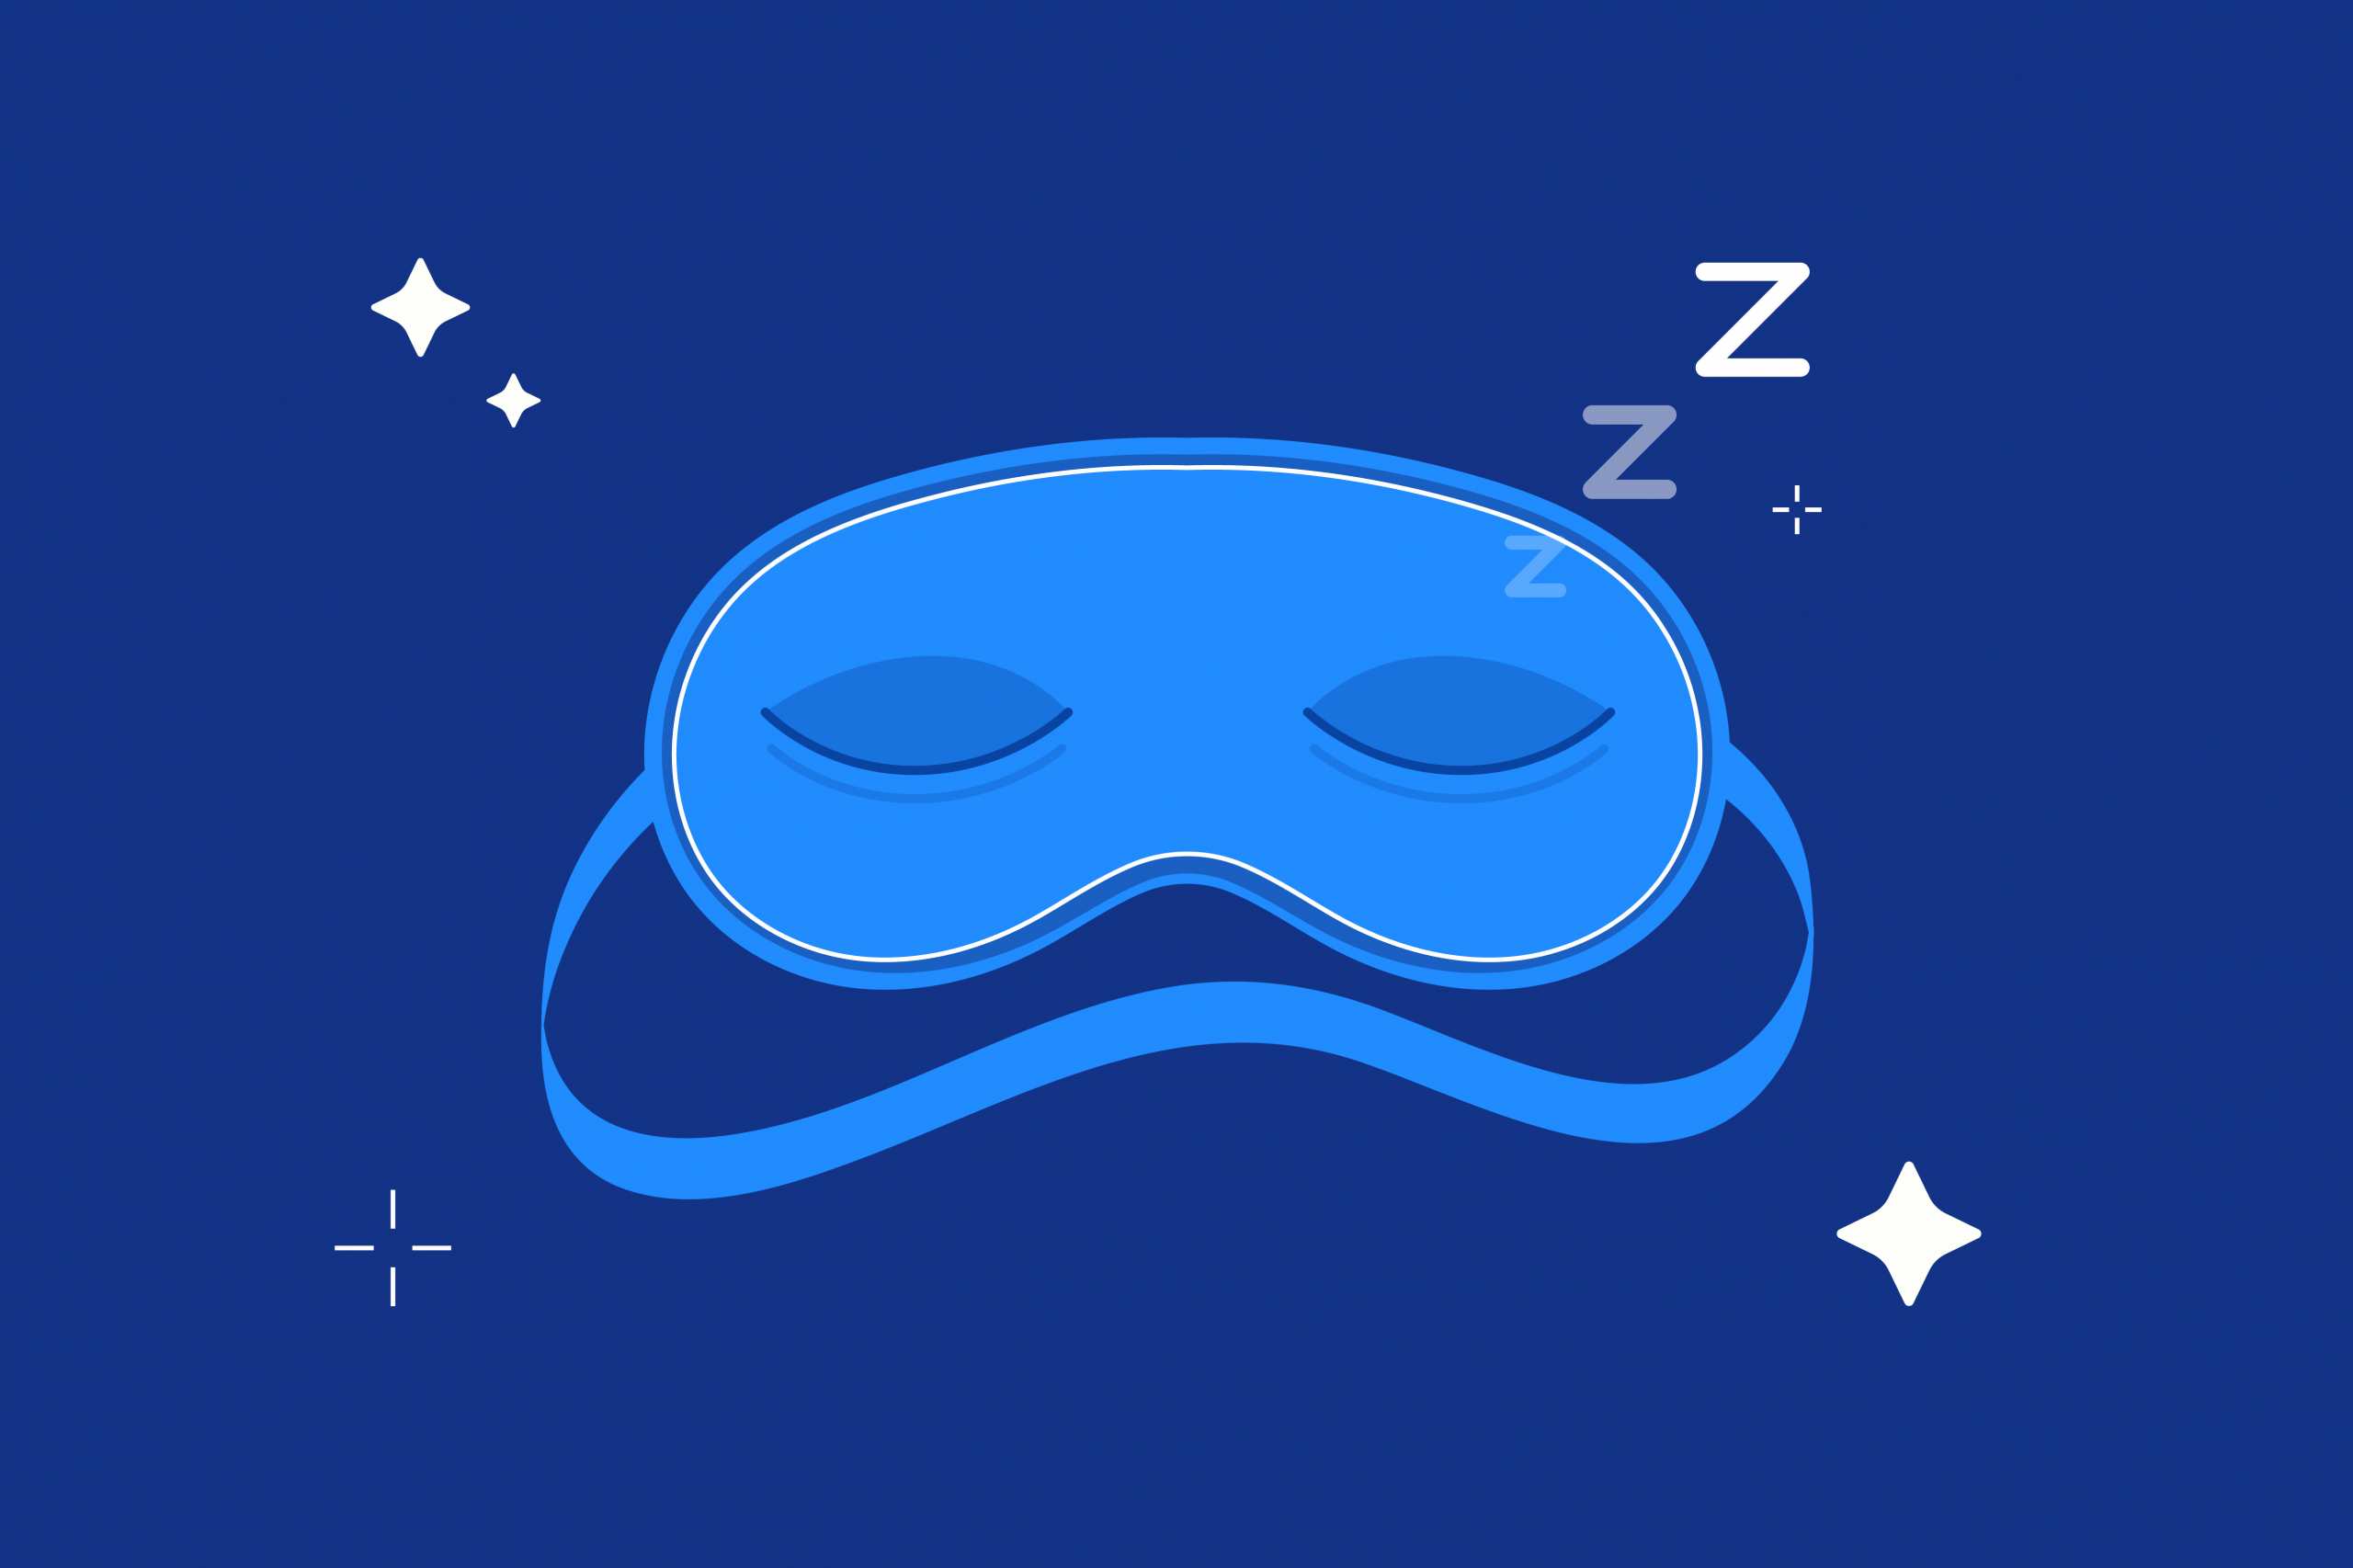 Why Do We Sleep? The Evolution of Rest According to Science